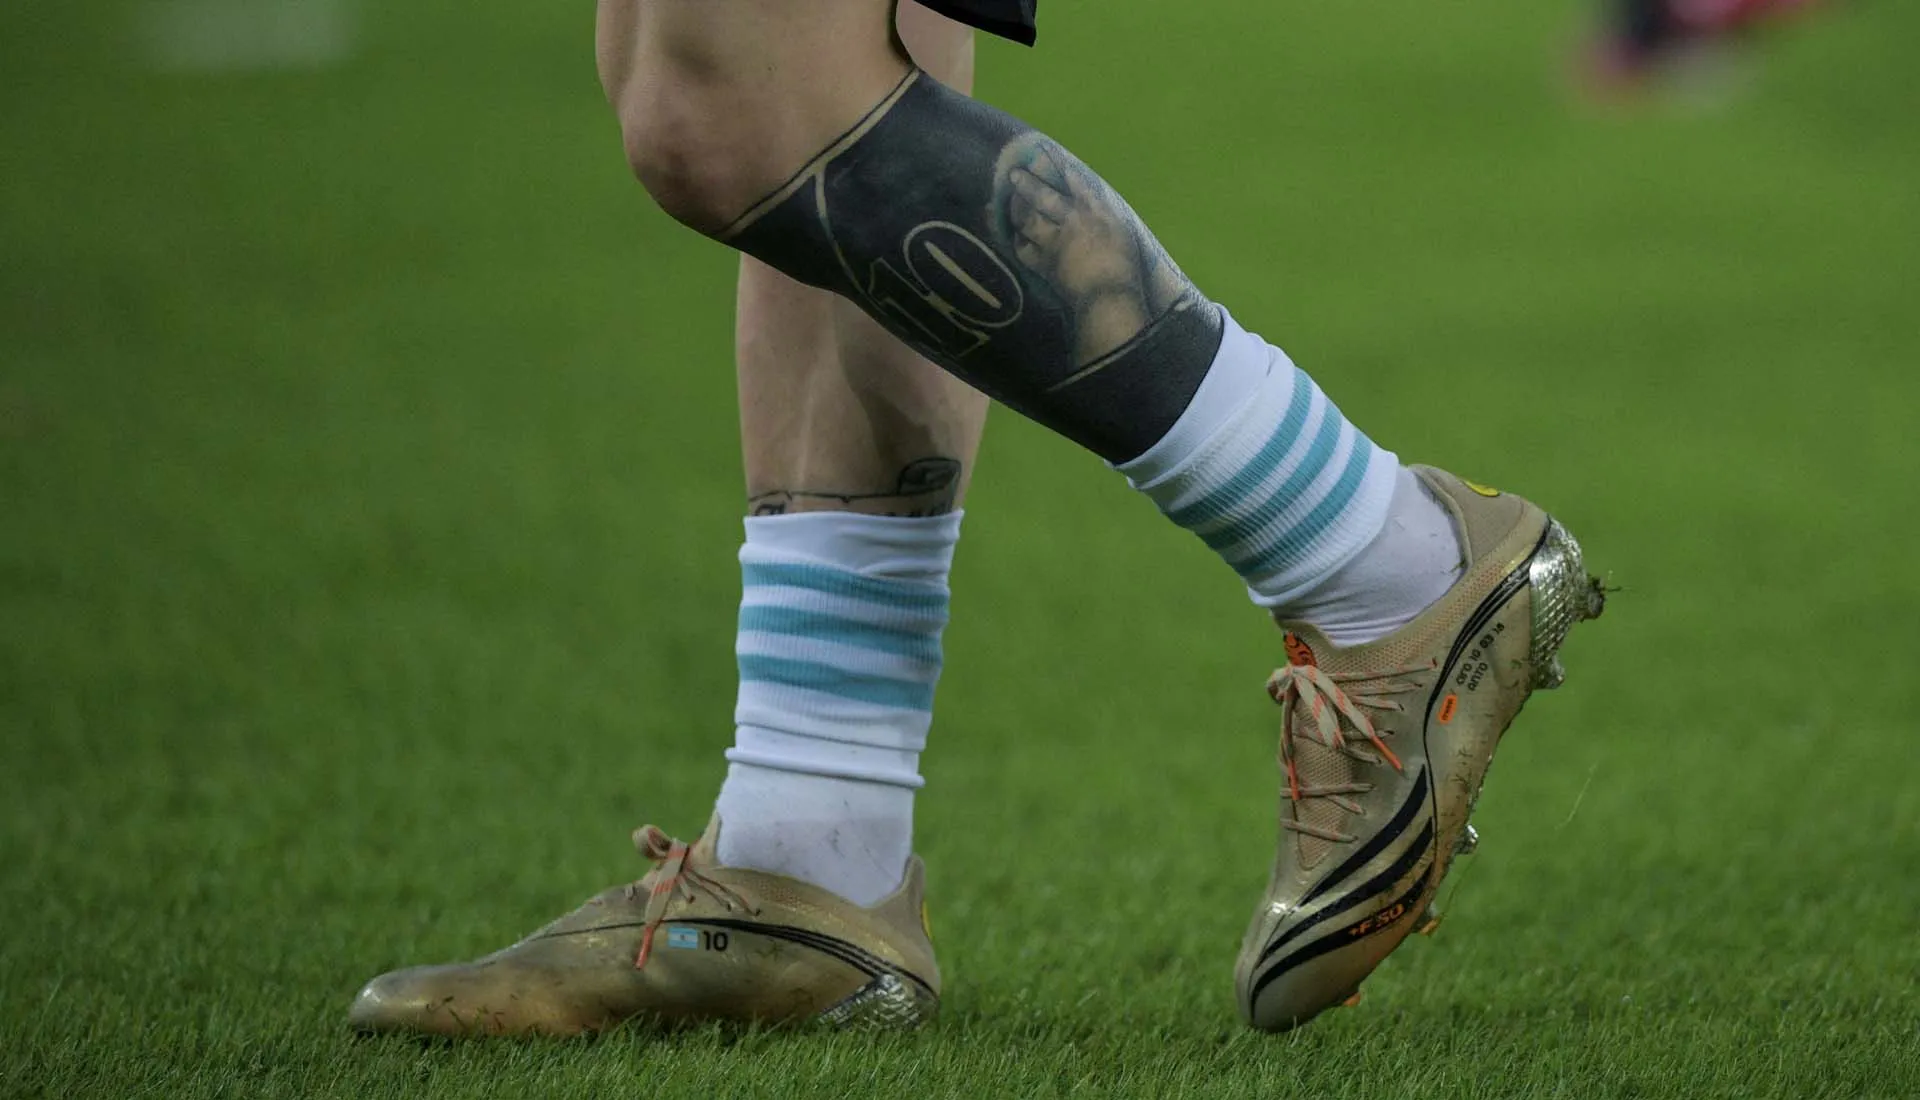 Messi wears the Adidas X Speedflow football boots in matches | SportzPoint